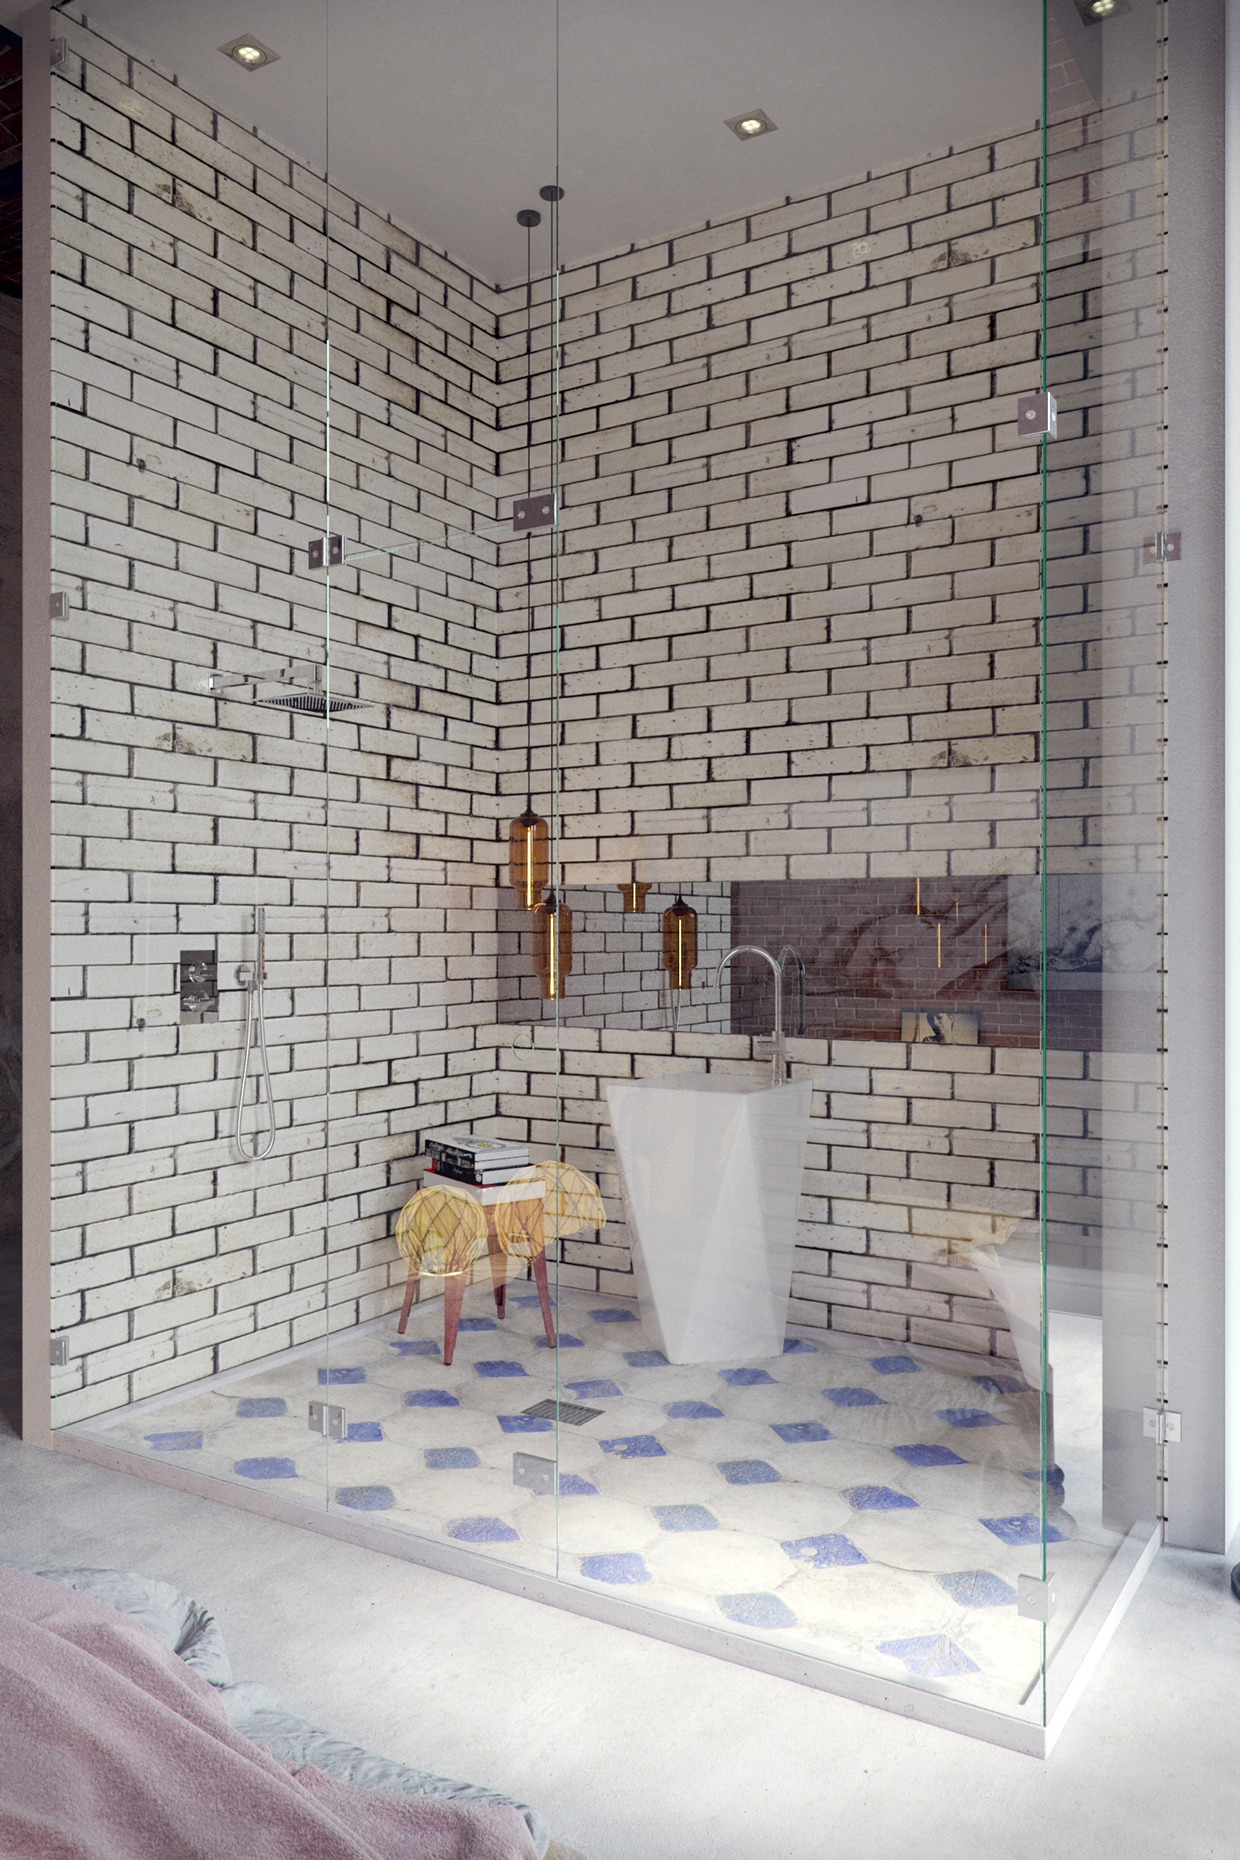 Bathroom decoration made of white brick "width =" 1240 "height =" 1860 "srcset =" https://mileray.com/wp-content/uploads/2020/05/1588516177_44_Modern-Bathroom-Design-Ideas-With-Minimalist-and-Trendy-Tips-In.jpg 1240w, https://mileray.com /wp-content/uploads/2016/09/Algimantas-Raubiška-200x300.jpg 200w, https://mileray.com/wp-content/uploads/2016/09/Algimantas-Raubiška-768x1152.jpg 768w, https: / /mileray.com/wp-content/uploads/2016/09/Algimantas-Raubiška-683x1024.jpg 683w, https://mileray.com/wp-content/uploads/2016/09/Algimantas-Raubiška-696x1044.jpg 696w , https://mileray.com/wp-content/uploads/2016/09/Algimantas-Raubiška-1068x1602.jpg 1068w, https://mileray.com/wp-content/uploads/2016/09/Algimantas-Raubiška- 280x420.jpg 280w "sizes =" (maximum width: 1240px) 100vw, 1240px